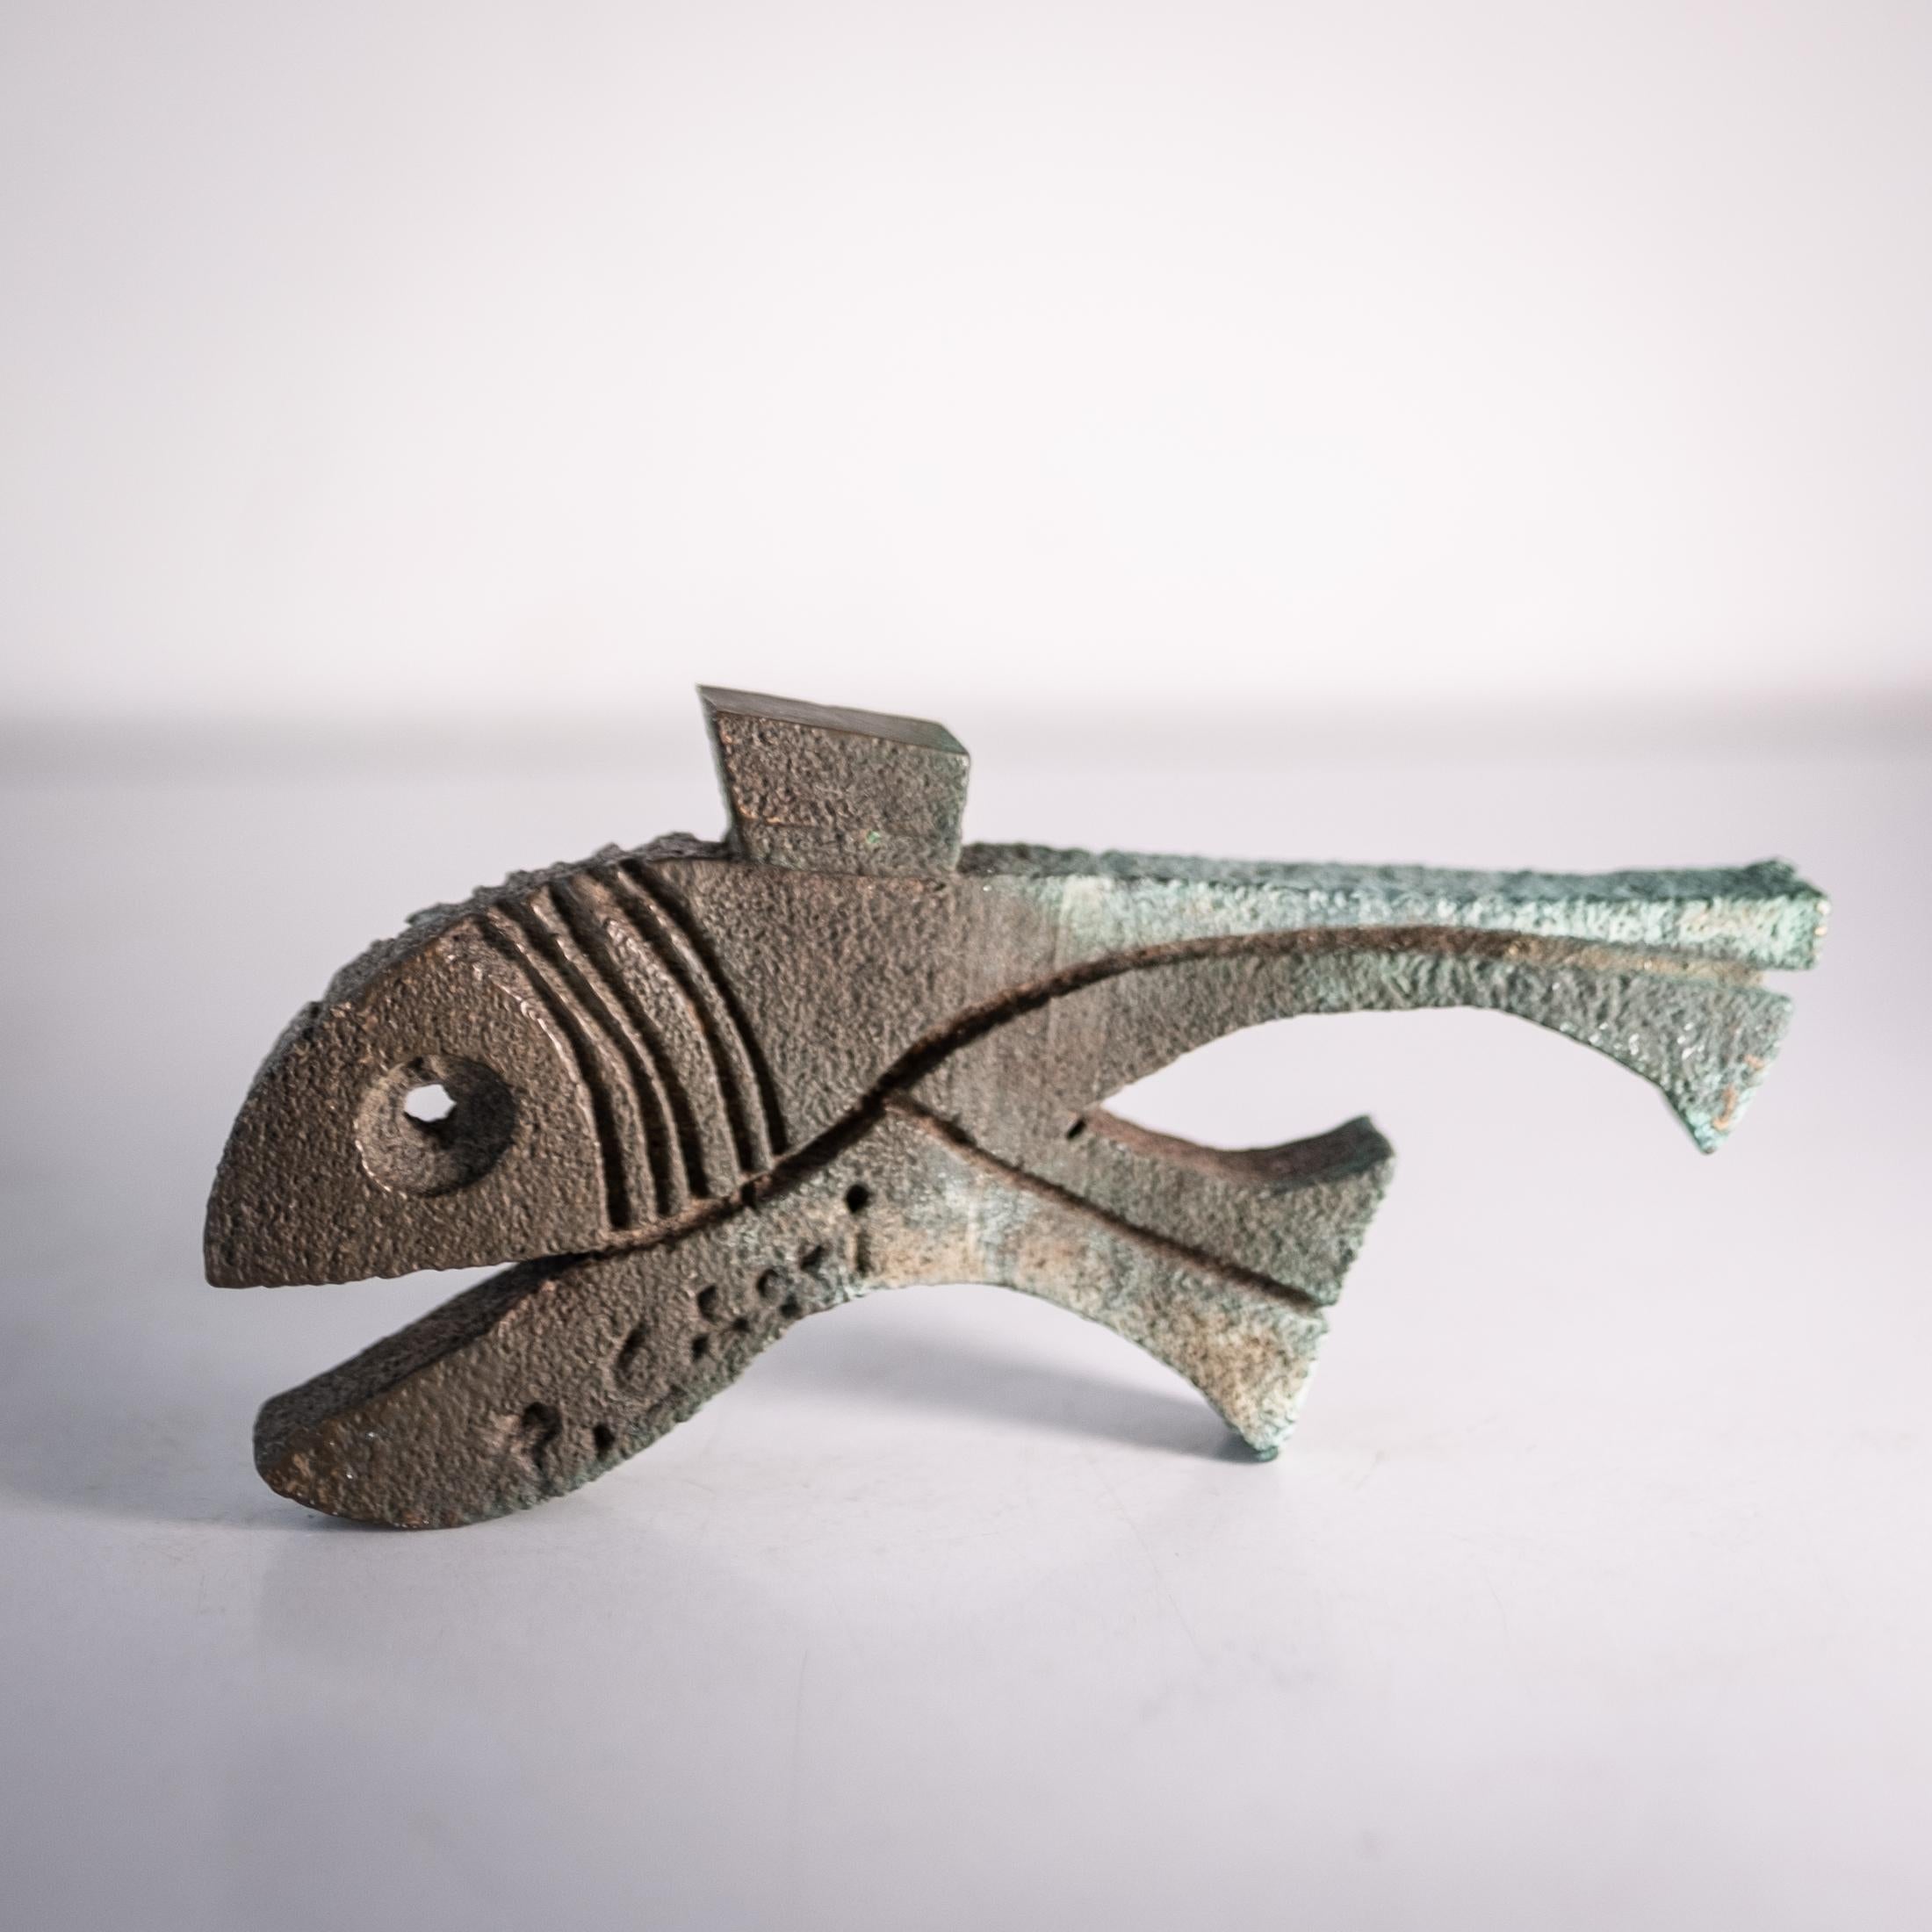 Vintage bronze fish sculpture by Paolo Soleri. Fantastic patina. Signed.

Paolo Soleri (1919-2013), the founder of Cosanti and Arcosanti, was an important artist, architecture, philosopher and urban planner. The Italian architect studied with